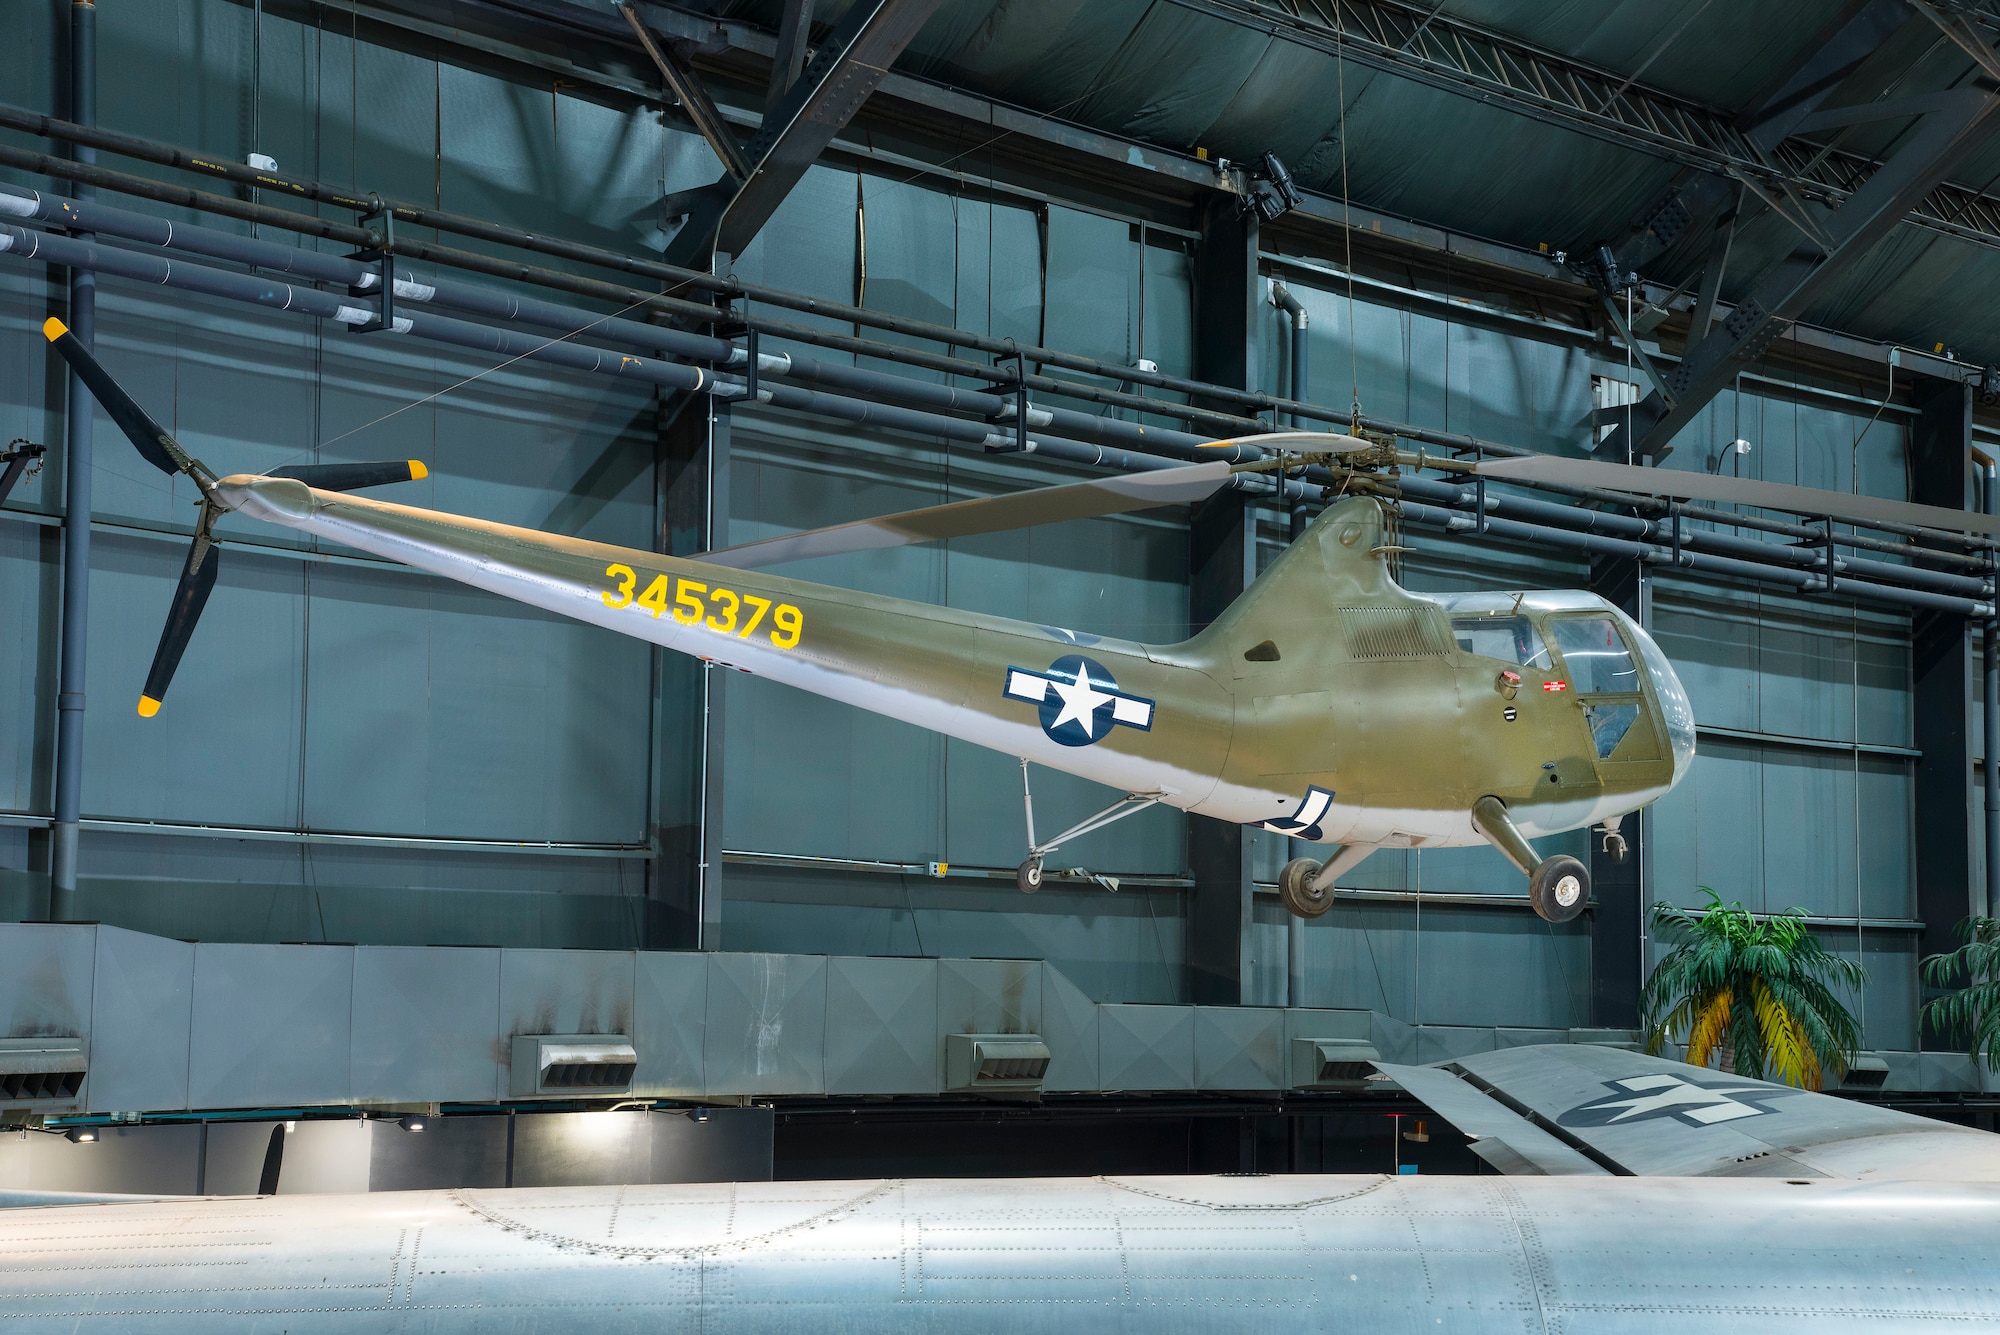 Sikorsky R-6A Hoverfly II in the World War II Gallery at the National Museum of the United States Air Force. (U.S. Air Force photo by Ken LaRock)